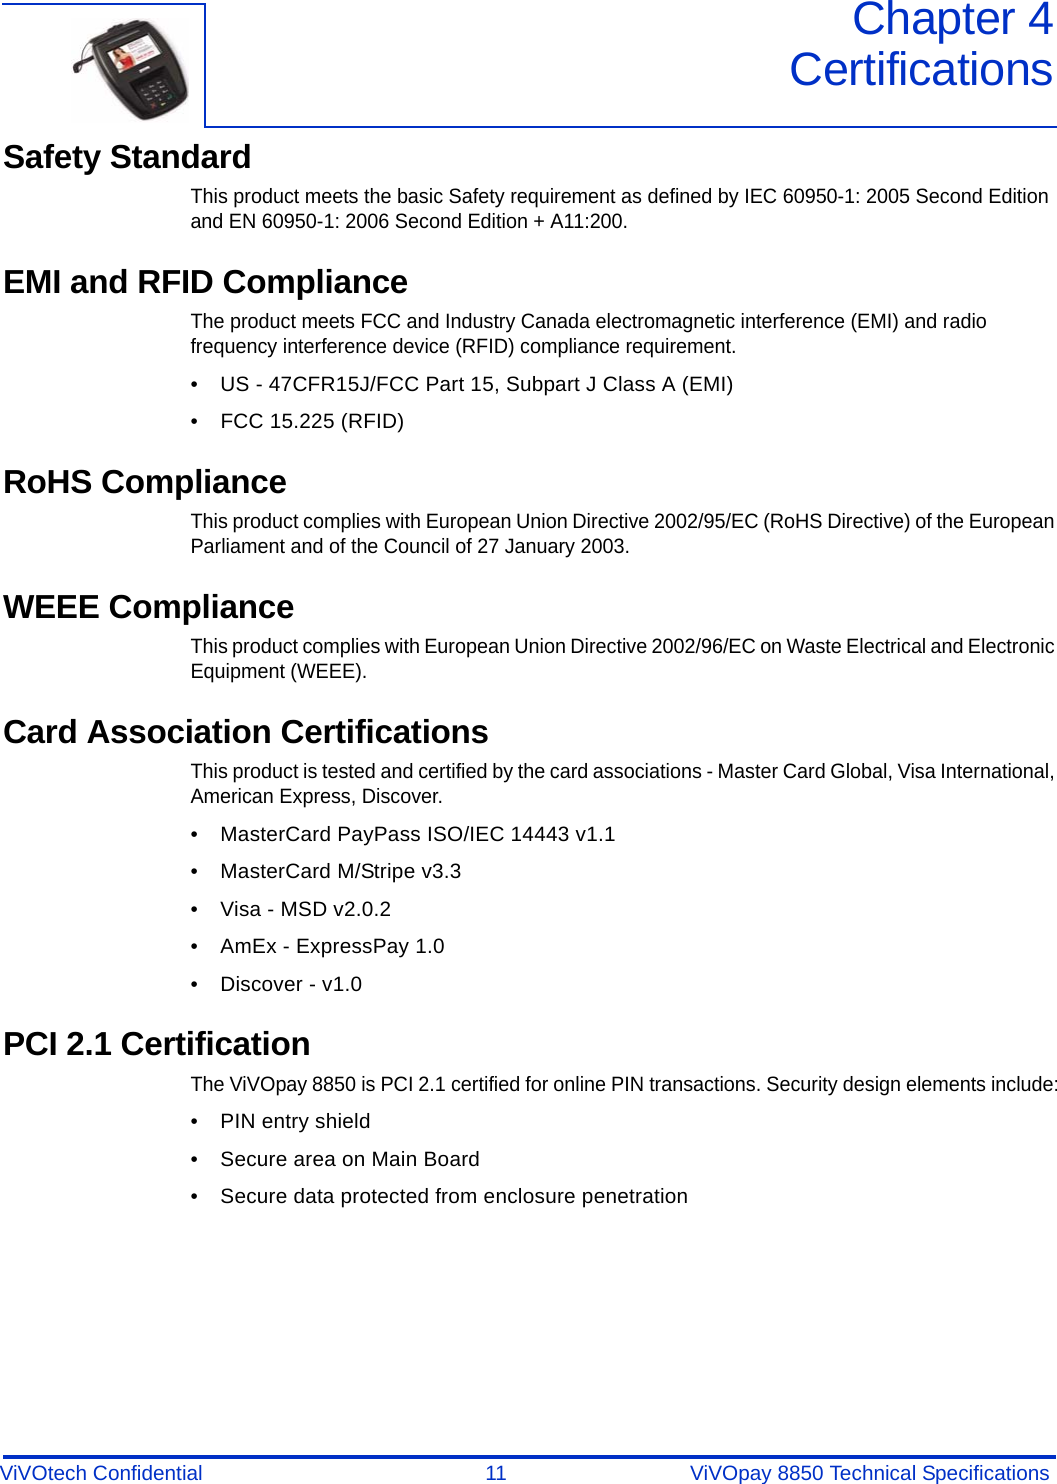 ViVOtech Confidential  11 ViVOpay 8850 Technical SpecificationsChapter 4CertificationsSafety StandardThis product meets the basic Safety requirement as defined by IEC 60950-1: 2005 Second Edition and EN 60950-1: 2006 Second Edition + A11:200. EMI and RFID ComplianceThe product meets FCC and Industry Canada electromagnetic interference (EMI) and radio frequency interference device (RFID) compliance requirement. • US - 47CFR15J/FCC Part 15, Subpart J Class A (EMI) • FCC 15.225 (RFID)RoHS ComplianceThis product complies with European Union Directive 2002/95/EC (RoHS Directive) of the European Parliament and of the Council of 27 January 2003.WEEE ComplianceThis product complies with European Union Directive 2002/96/EC on Waste Electrical and Electronic Equipment (WEEE).Card Association CertificationsThis product is tested and certified by the card associations - Master Card Global, Visa International, American Express, Discover.• MasterCard PayPass ISO/IEC 14443 v1.1• MasterCard M/Stripe v3.3 • Visa - MSD v2.0.2• AmEx - ExpressPay 1.0 • Discover - v1.0PCI 2.1 CertificationThe ViVOpay 8850 is PCI 2.1 certified for online PIN transactions. Security design elements include:• PIN entry shield• Secure area on Main Board• Secure data protected from enclosure penetration